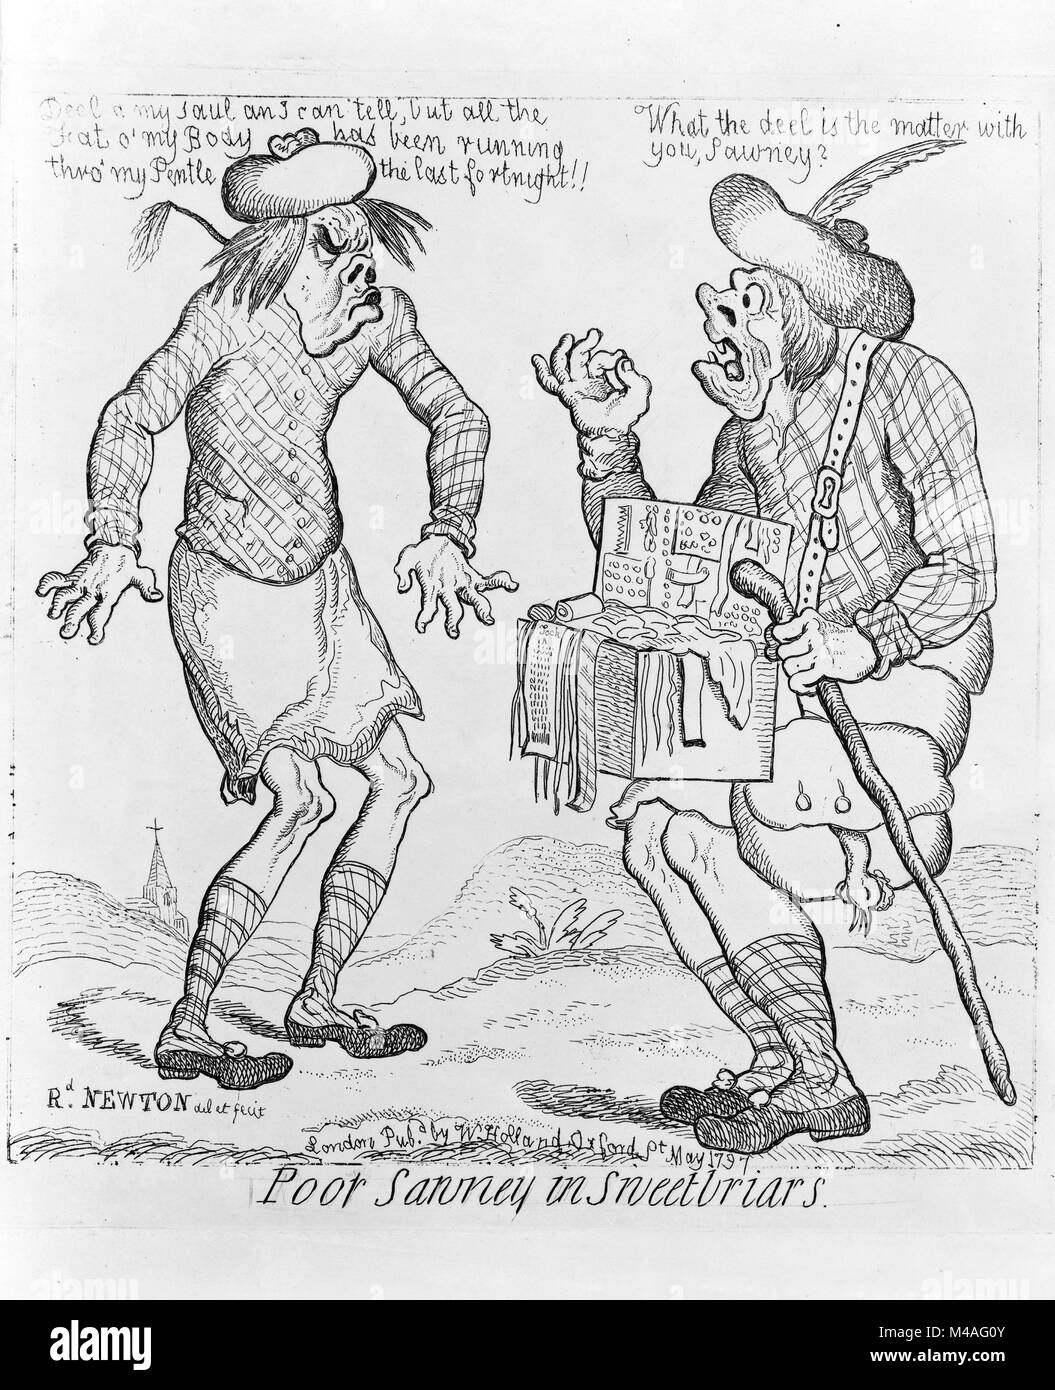 Illustration shows two grotesquely caricatured Scots passing on the road, one, a peddler of sewing wares, says to the other who is somewhat emaciated, 'What the deel is the matter with you Sawney?' to which he responds, 'Deel a my Saul an I can tell, but all the Fat o' my Body has been running thro' my Pentle the last fortnight!!' Newton, Richard, 1777-1798, artist Stock Photo